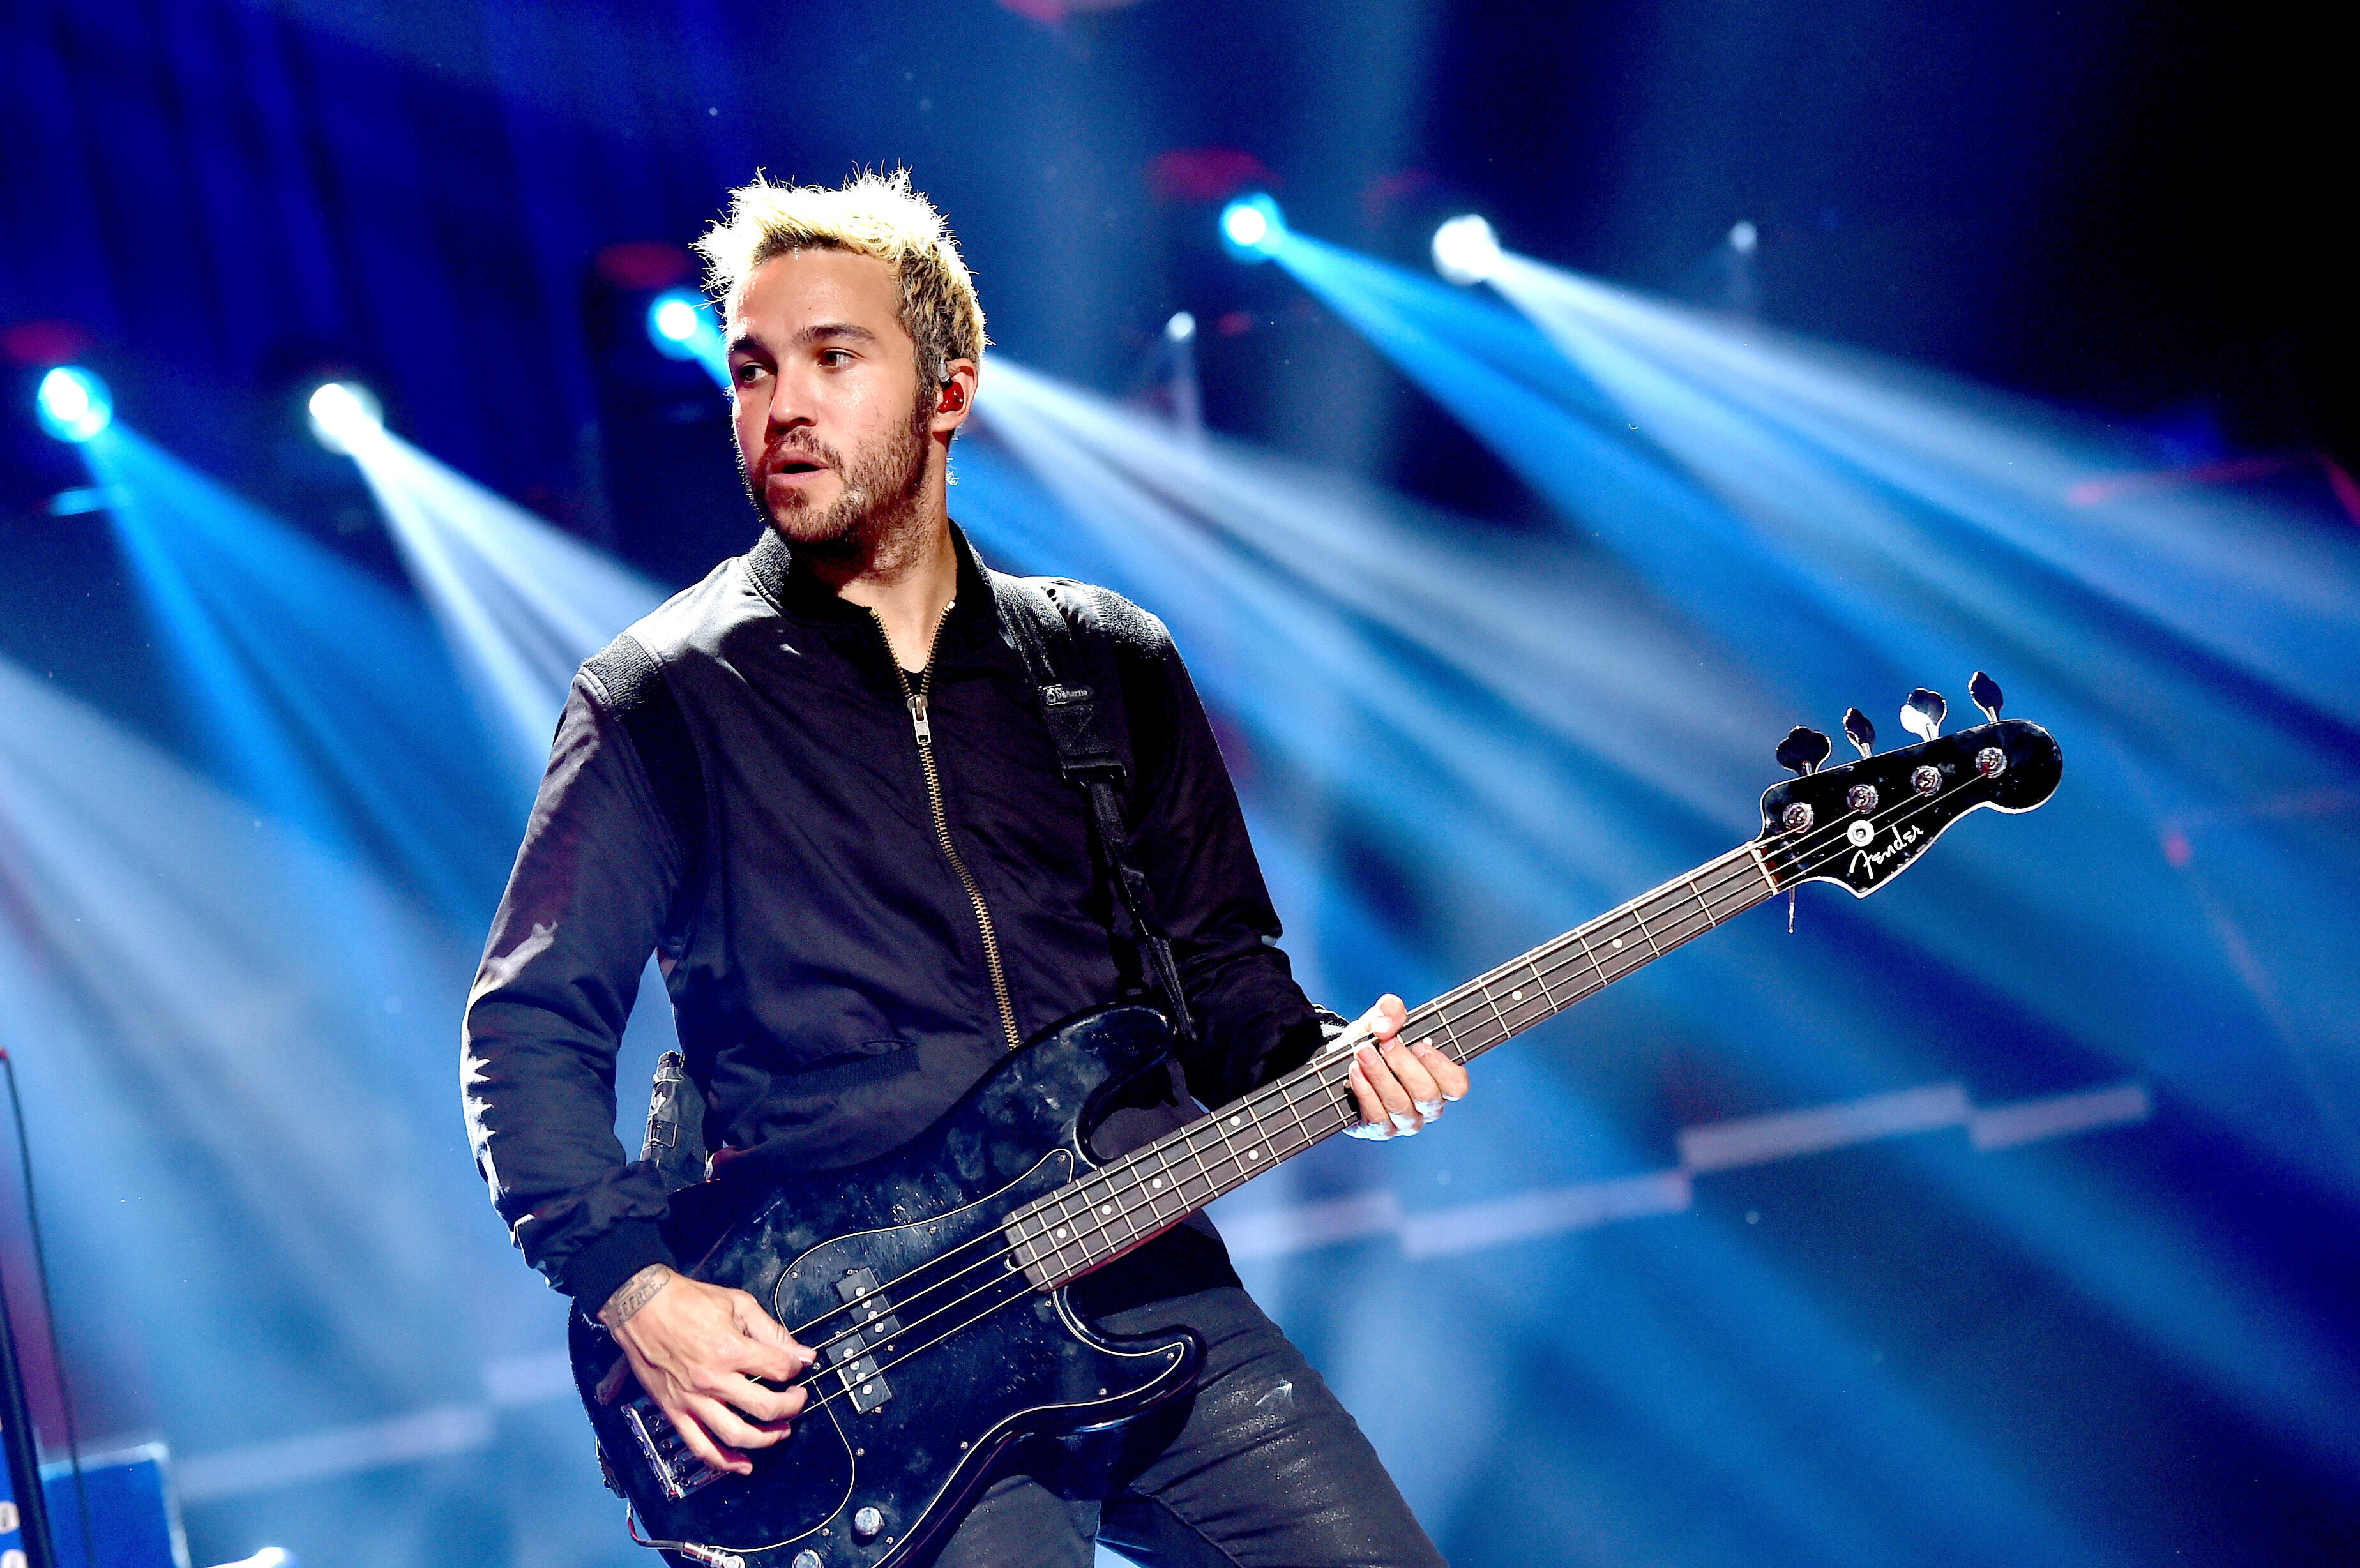 Fall Out Boy's Pete Wentz once guest starred on “One Tree Hill.” // Photo: Getty Images